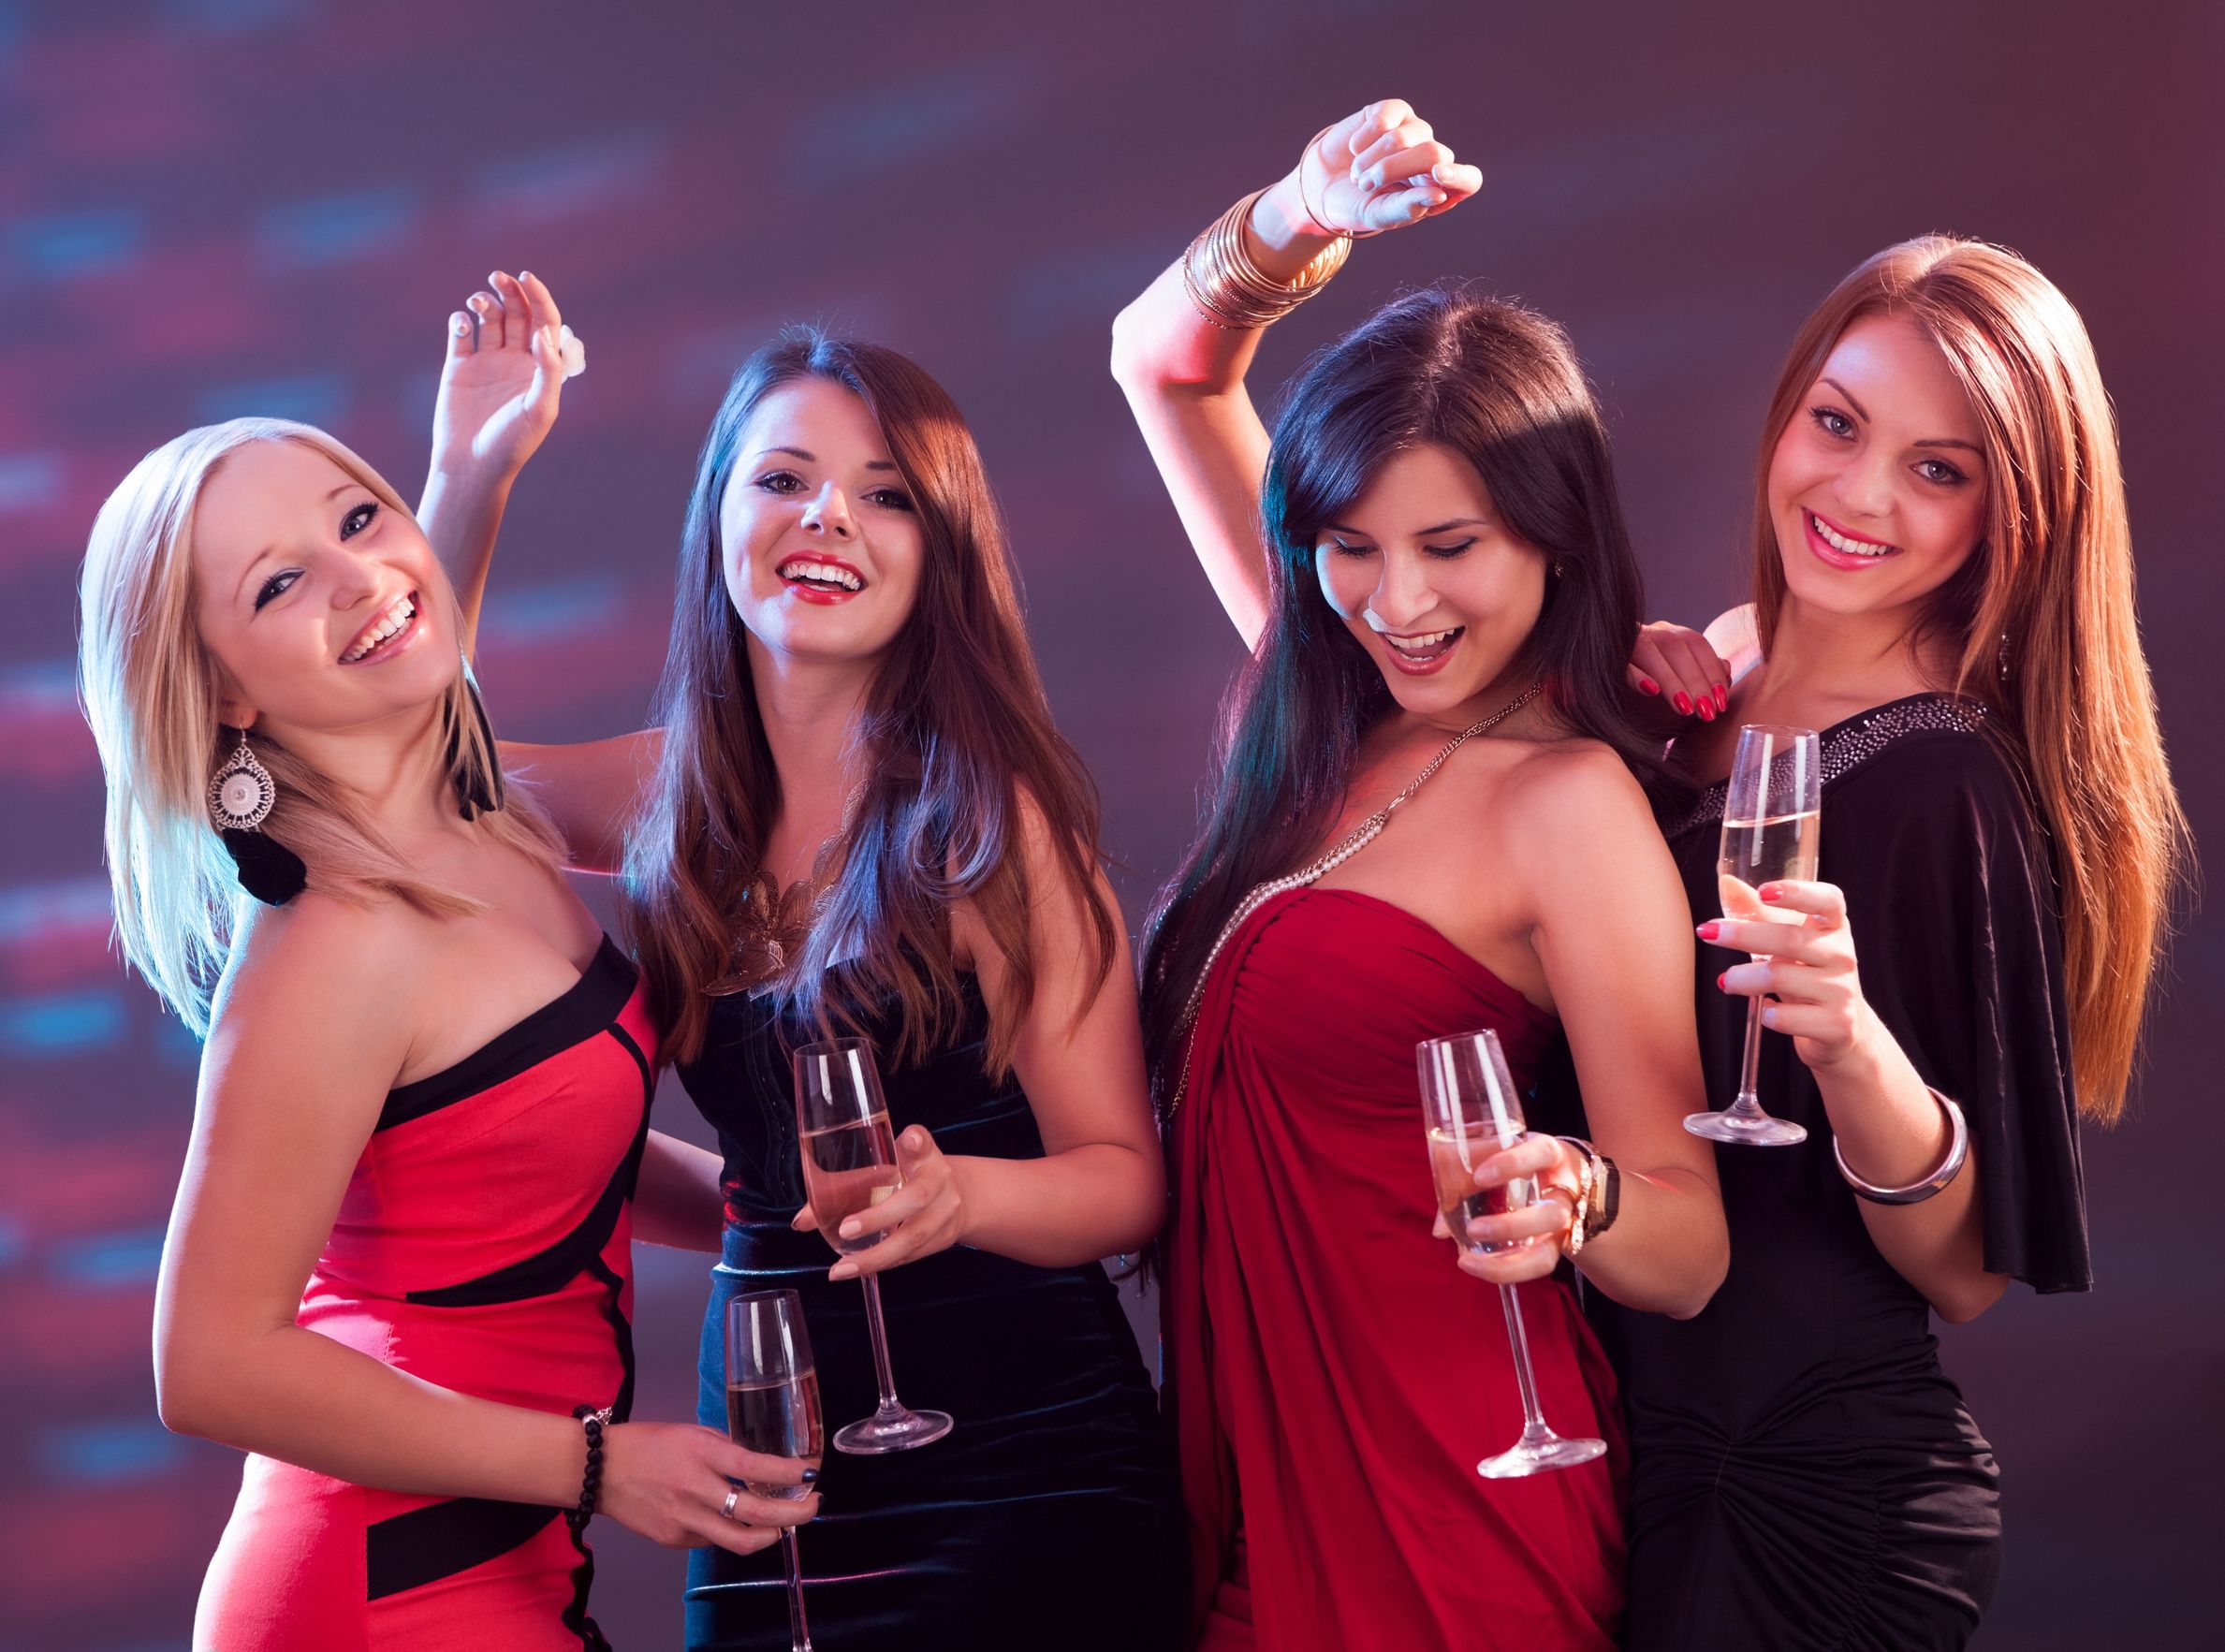 3 Considerations for Planning a Bachelor Party Venue in Scottsdale, AZ